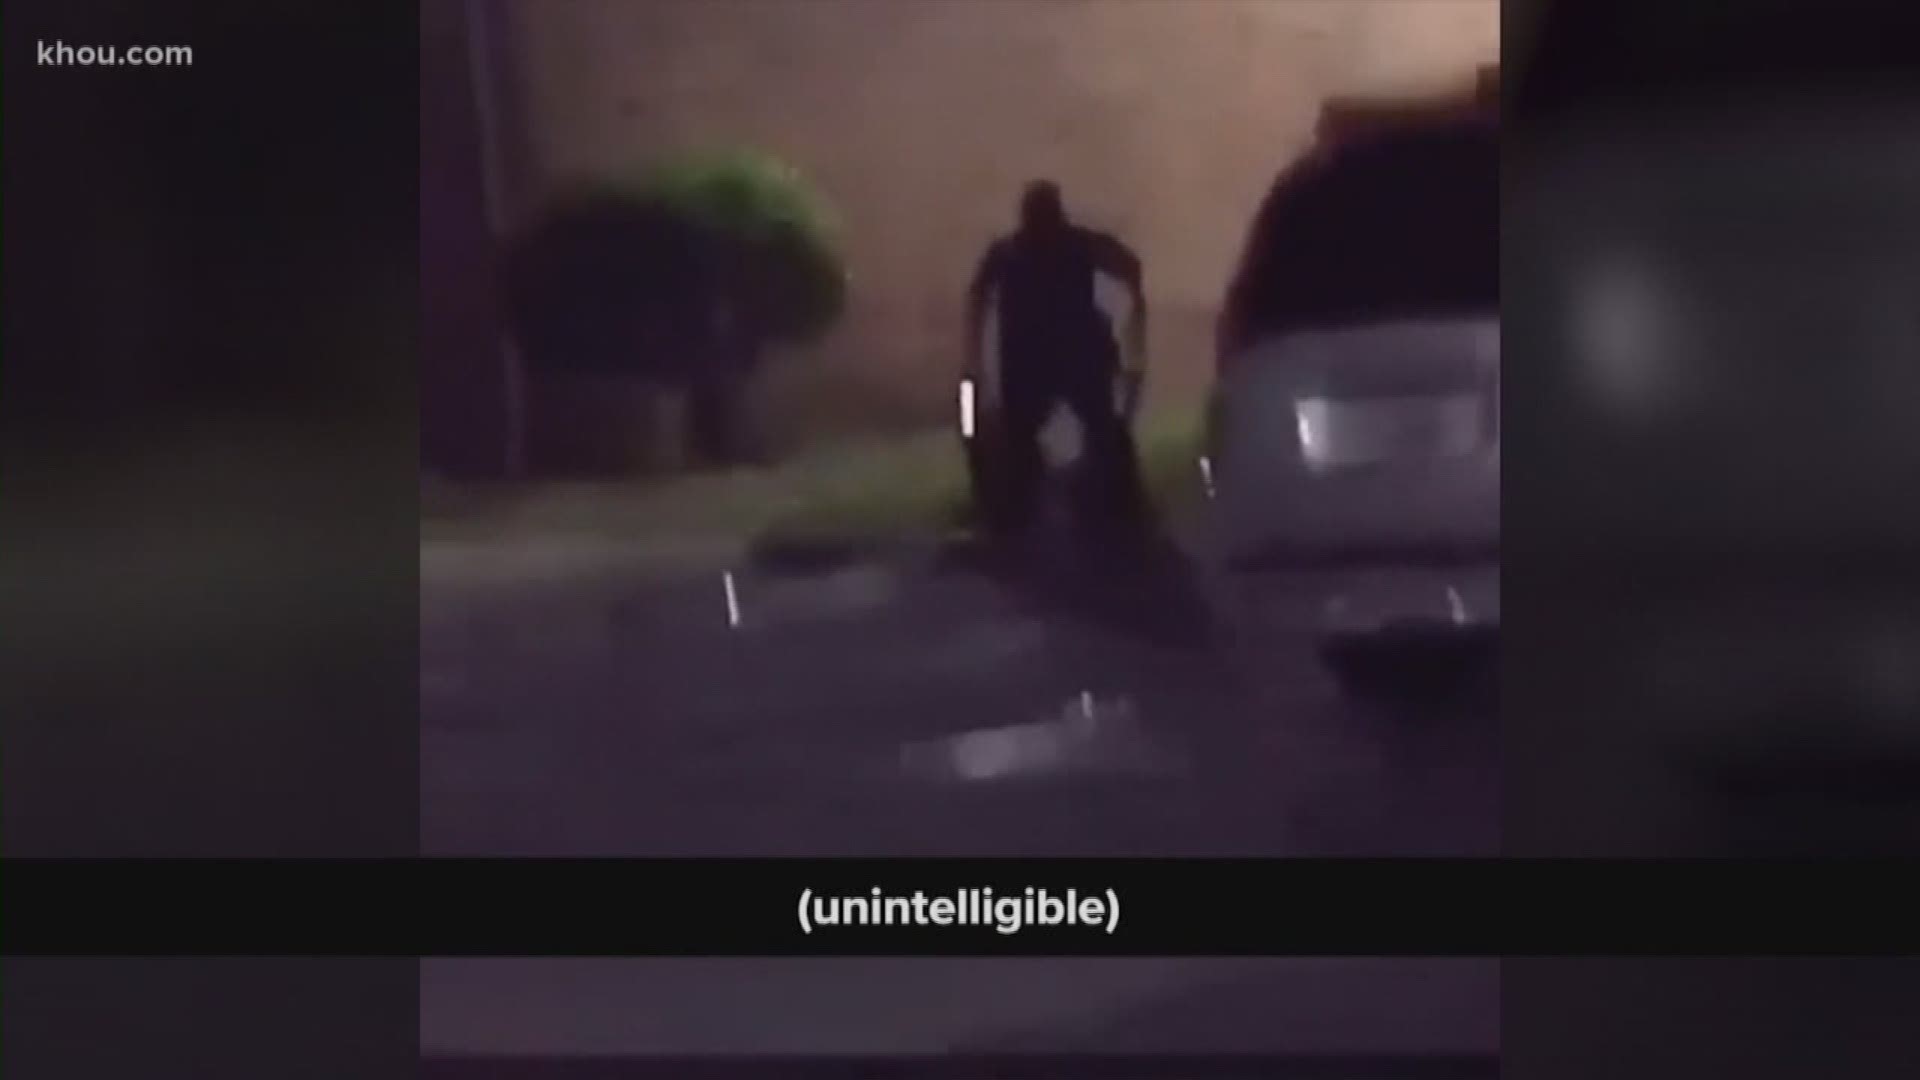 A video of a Baytown police officer shooting and killing an unarmed woman at her apartment complex is being shared on Facebook and Snapchat. Activists question if the shooting was justified.